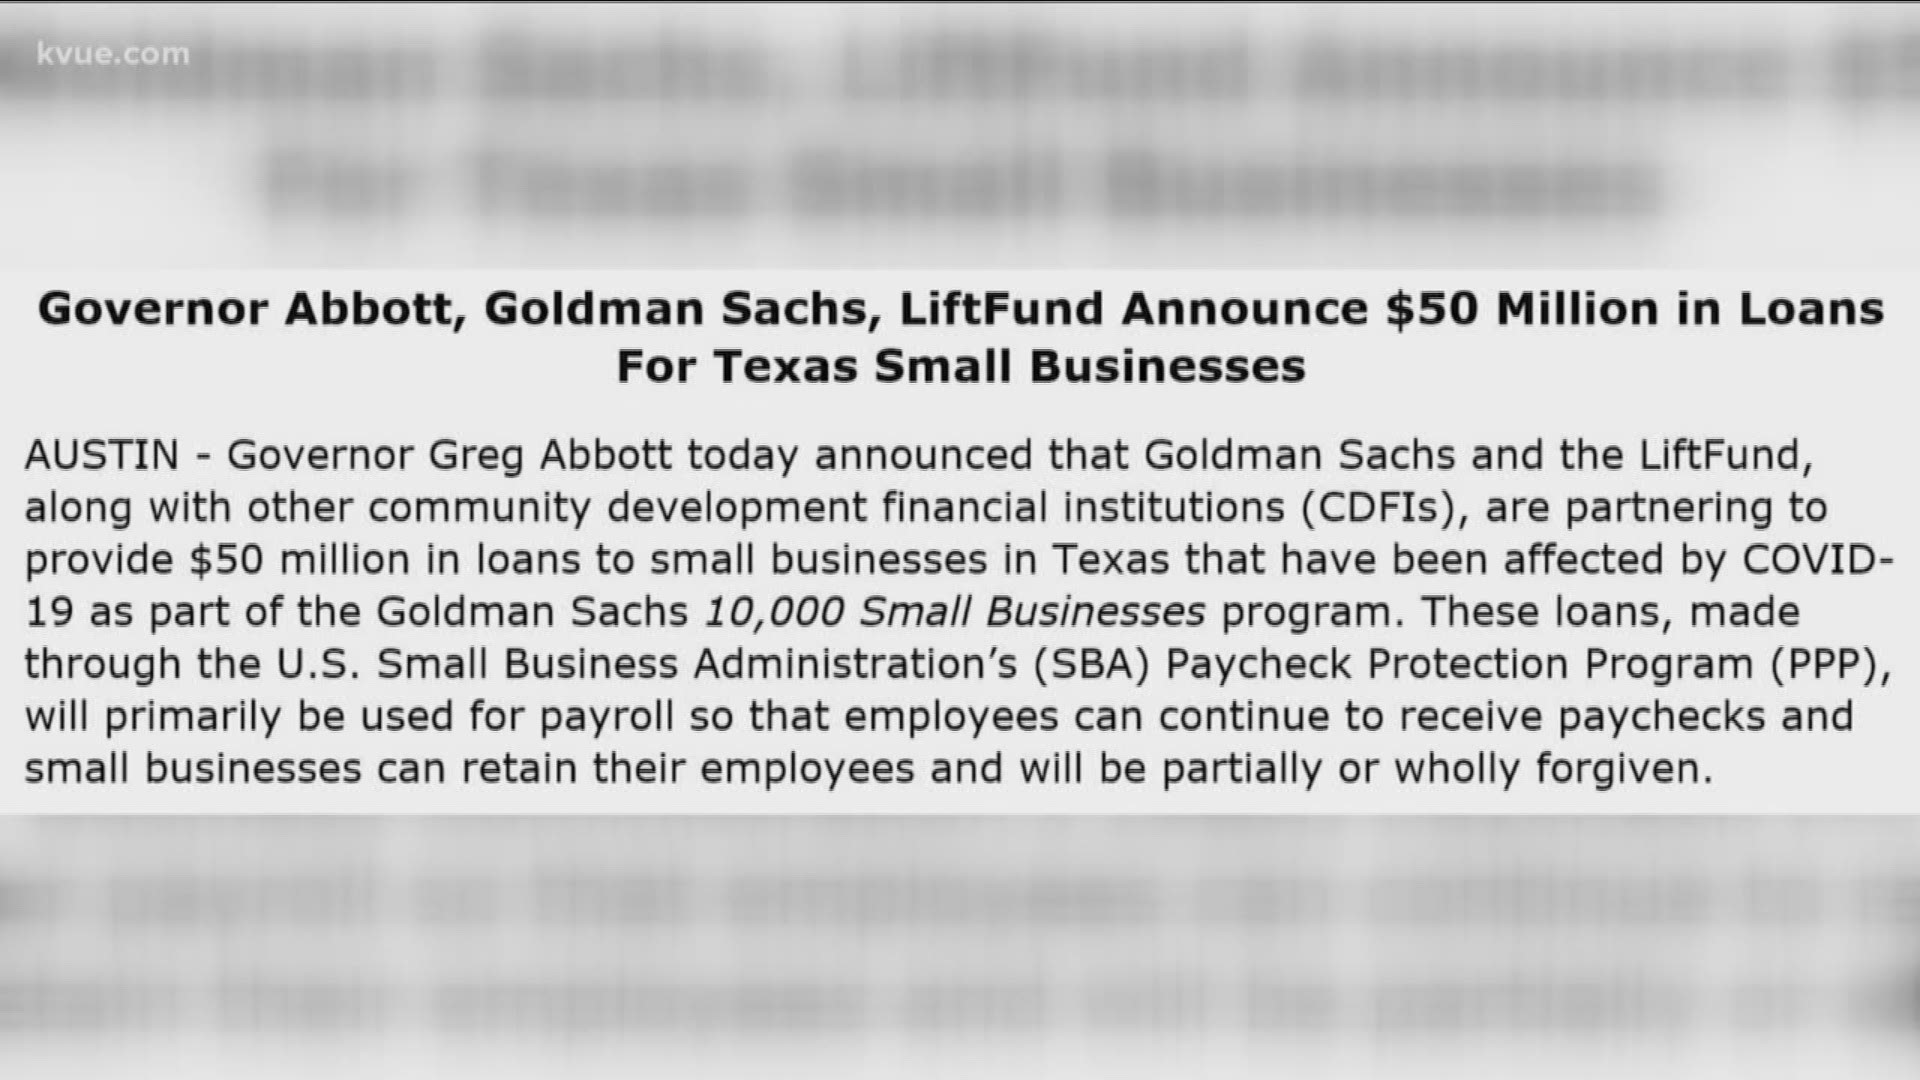 The governor announced Goldman Sachs and LiftFund are partnering to offer millions in loans to small businesses in Texas.